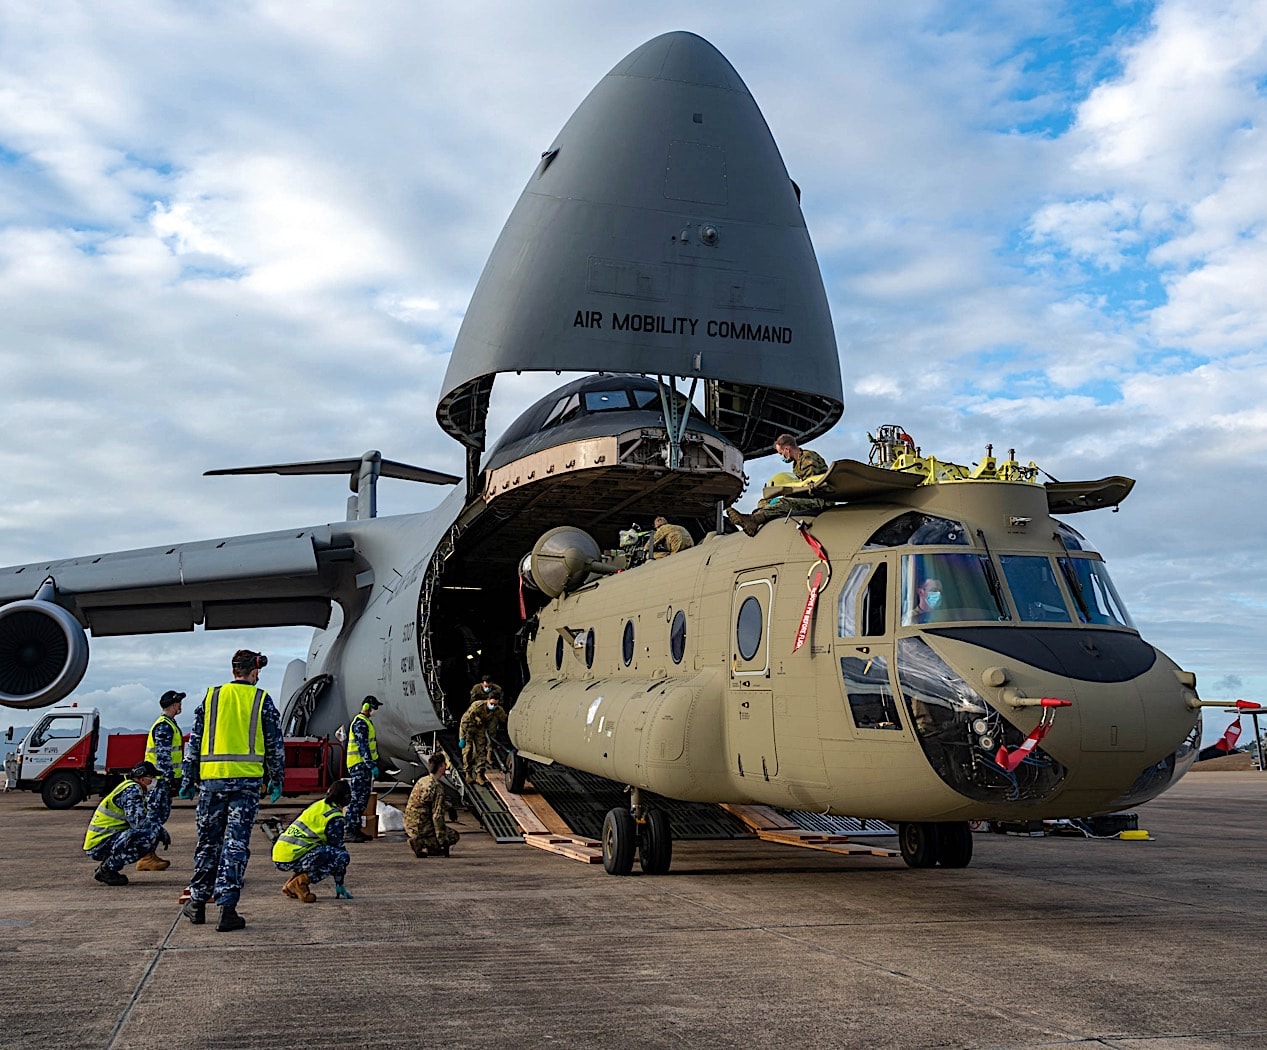 https://s1.cdn.autoevolution.com/images/news/here-s-a-c-5m-super-galaxy-giving-birth-to-a-ch-47f-chinook-there-were-two-in-there-167879_1.jpg